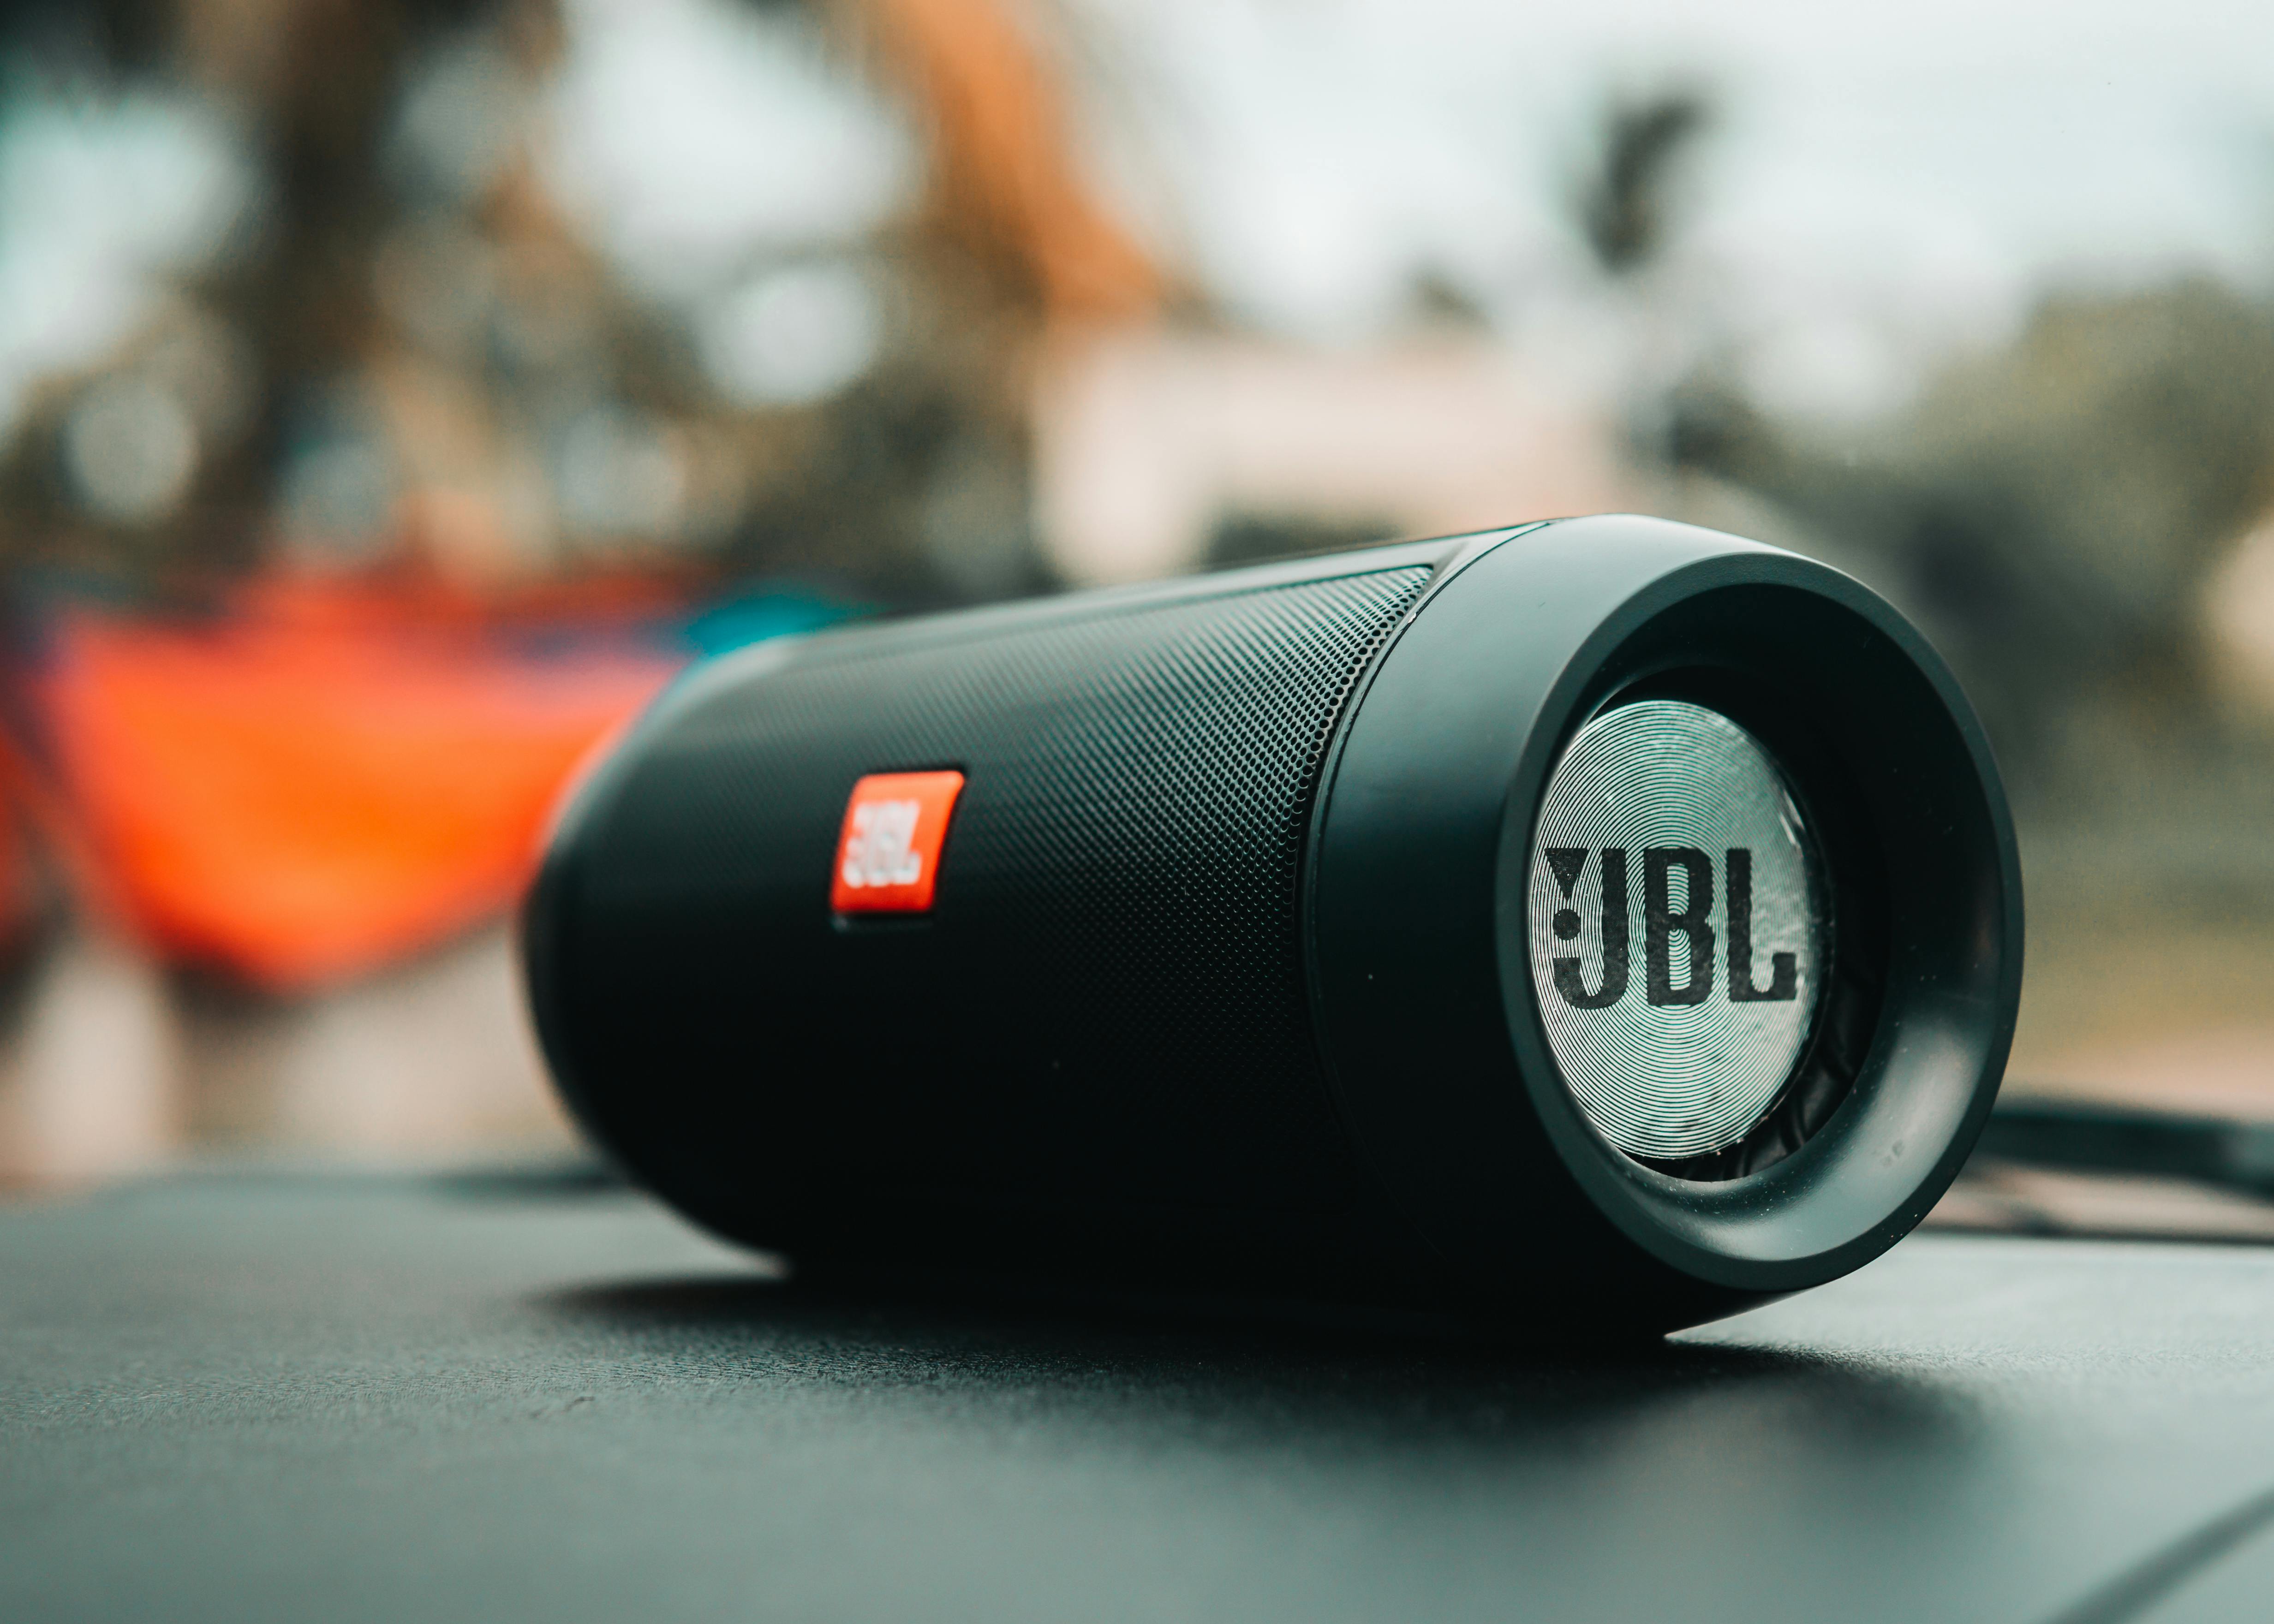 Jbl Wallpapers 65 pictures